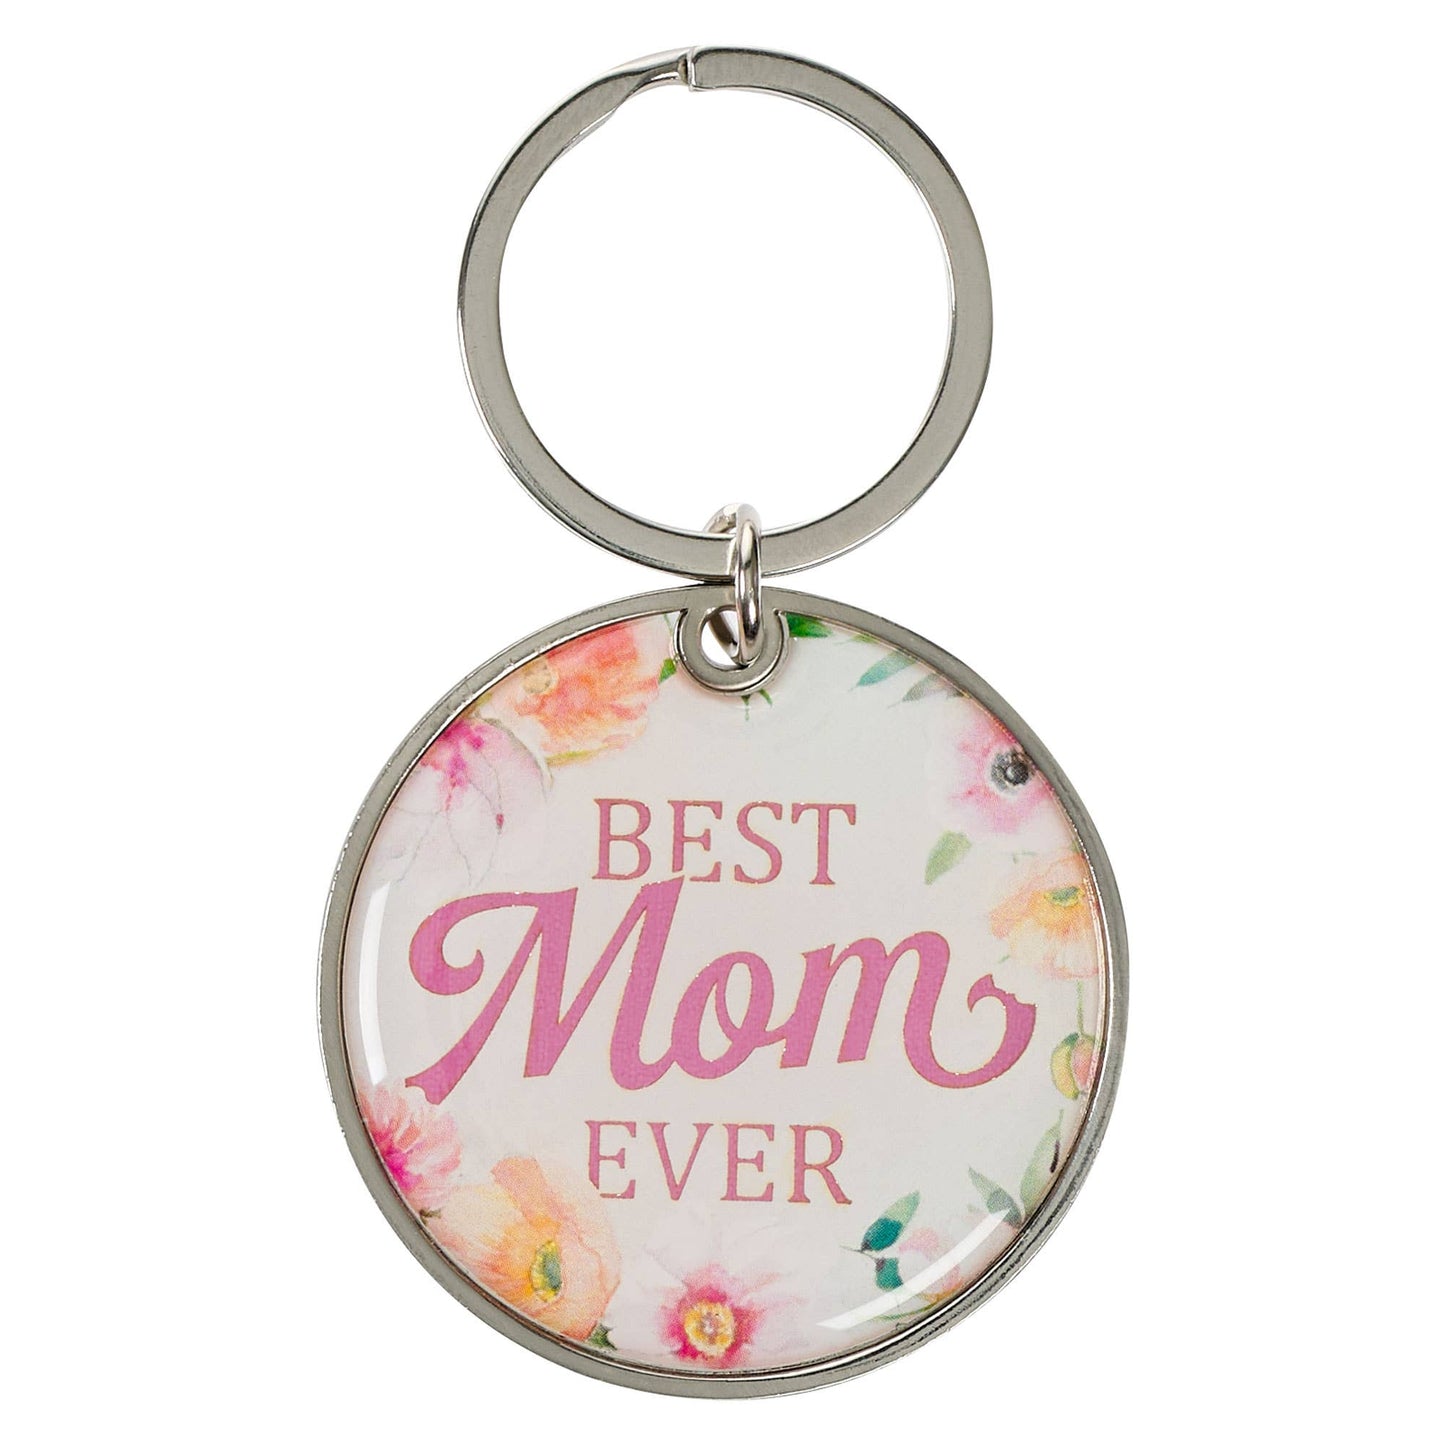 Best Mom Ever Epoxy-coated Metal Keychain - Numbers 6:24